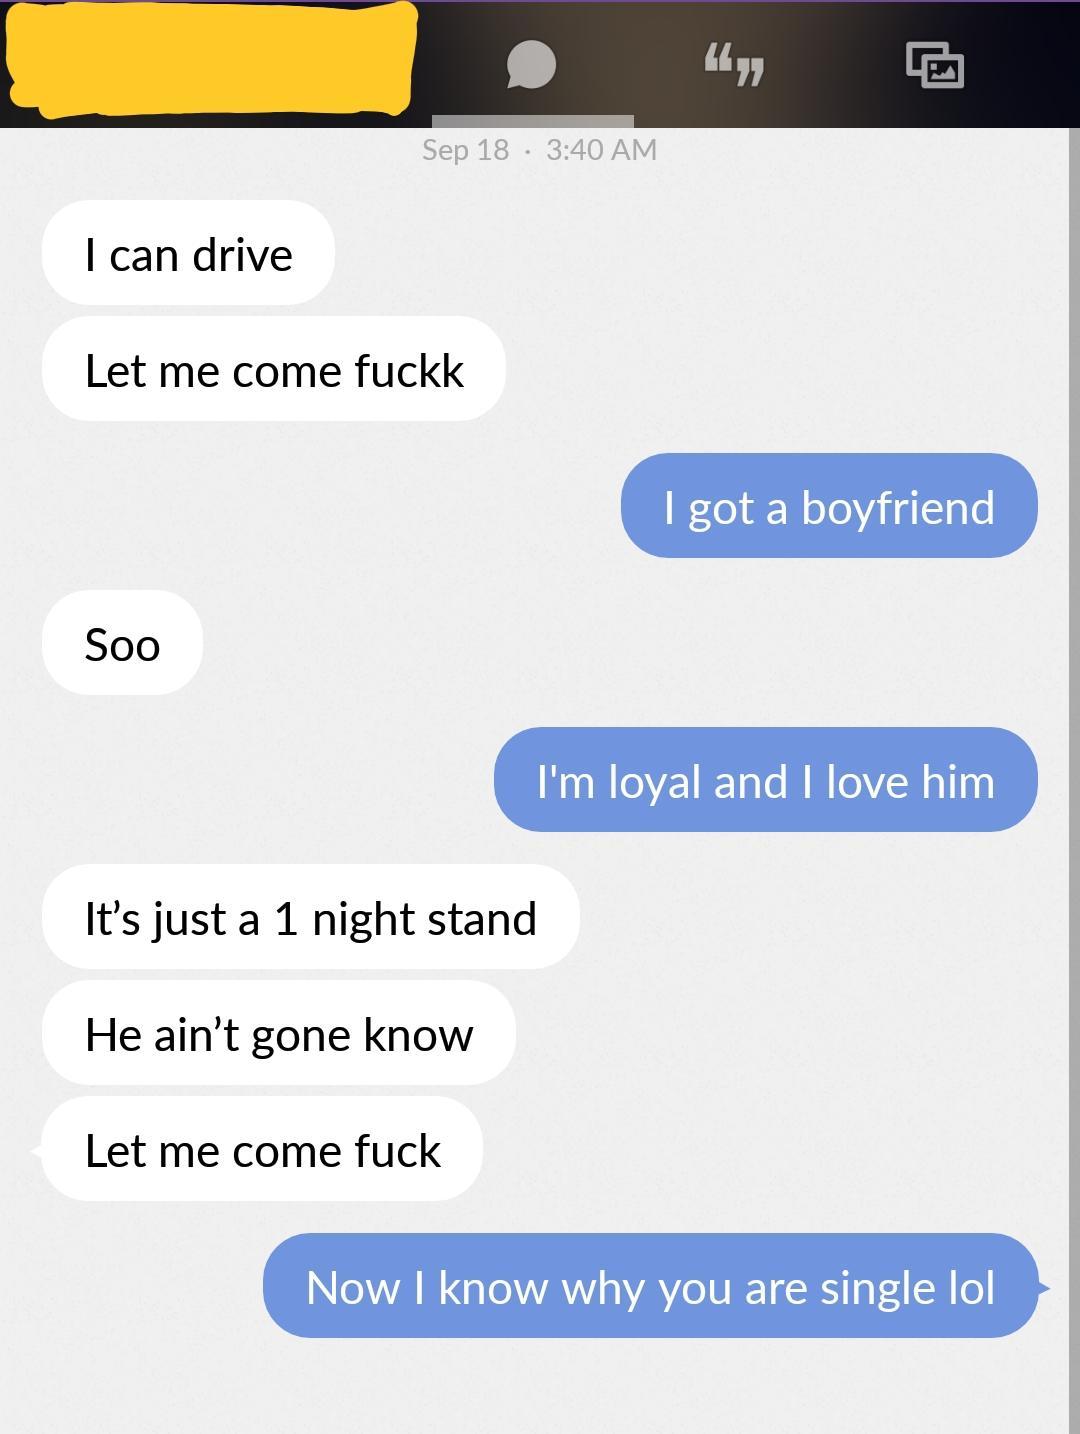 meet me text - Sep 18 I can drive Let me come fuckk I got a boyfriend Soo I'm loyal and I love him It's just a 1 night stand He ain't gone know Let me come fuck Now I know why you are single lol